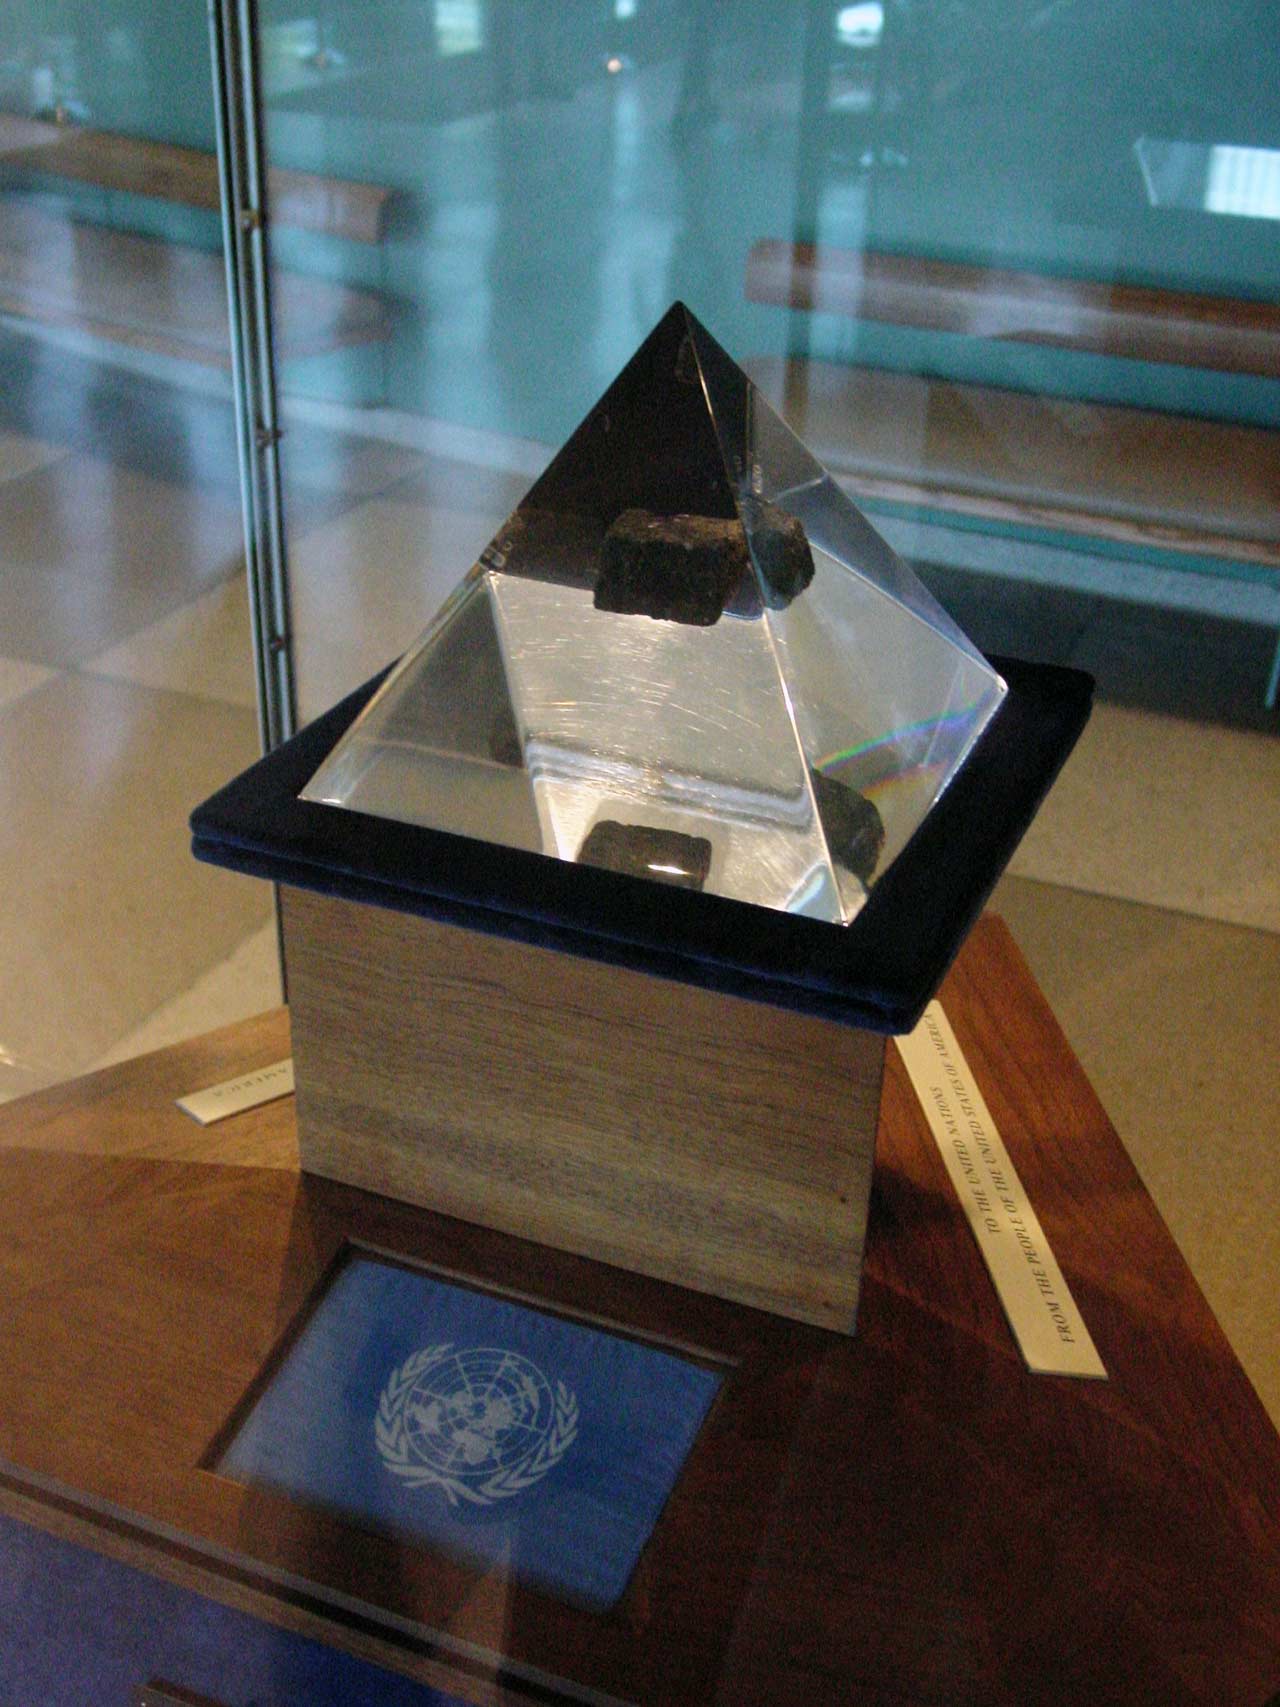 A small Moon rock encased in a pyramid of lucite inside a display case.